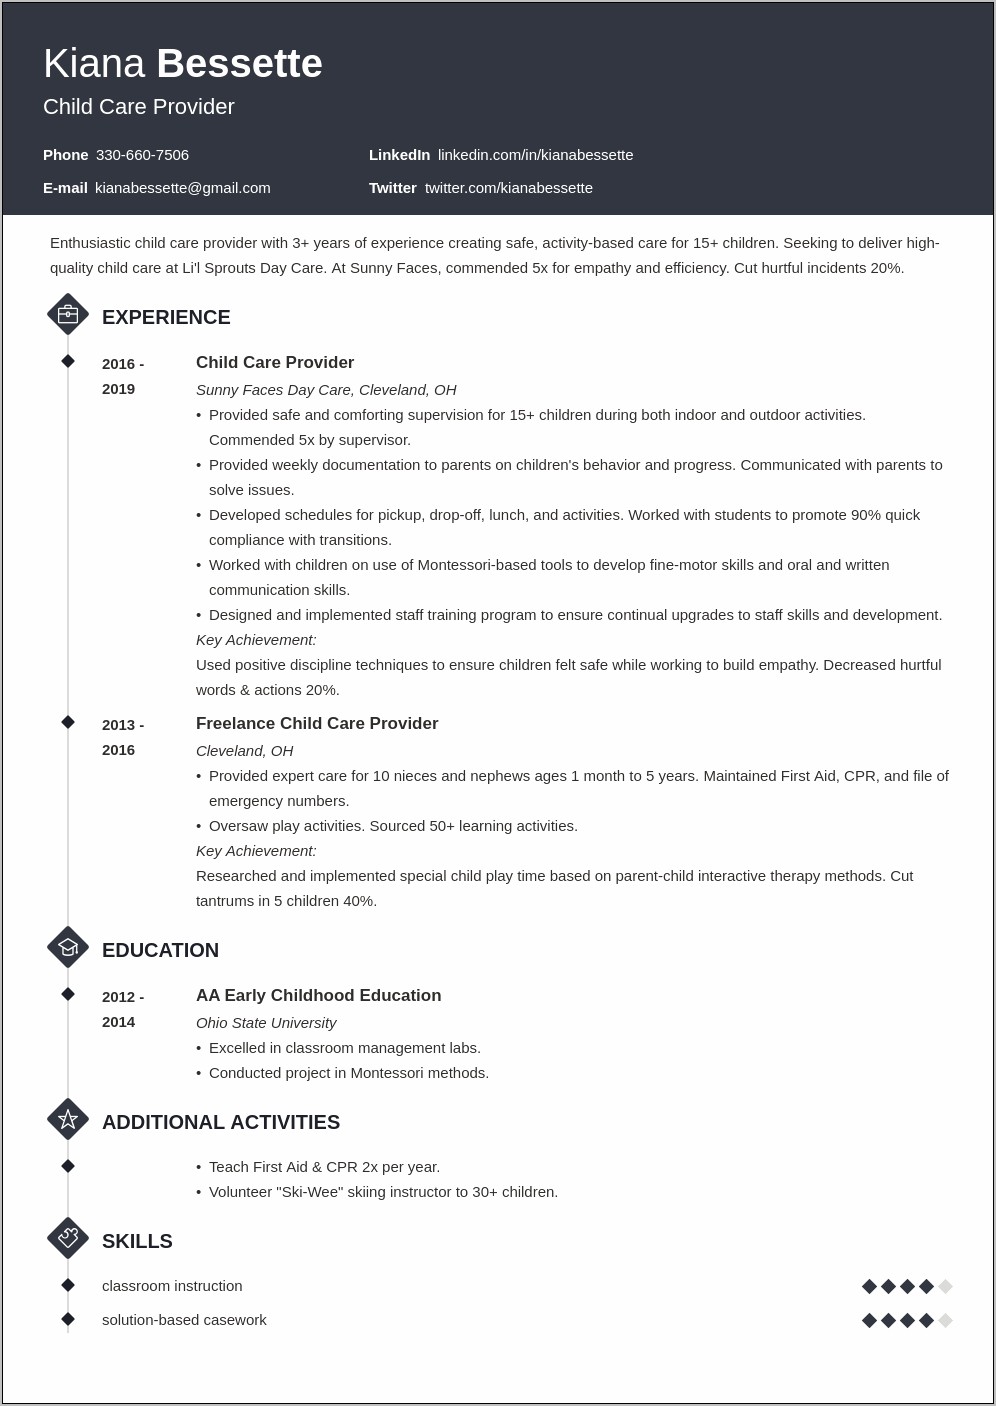 Sample Resume Objective To Work In Childcare